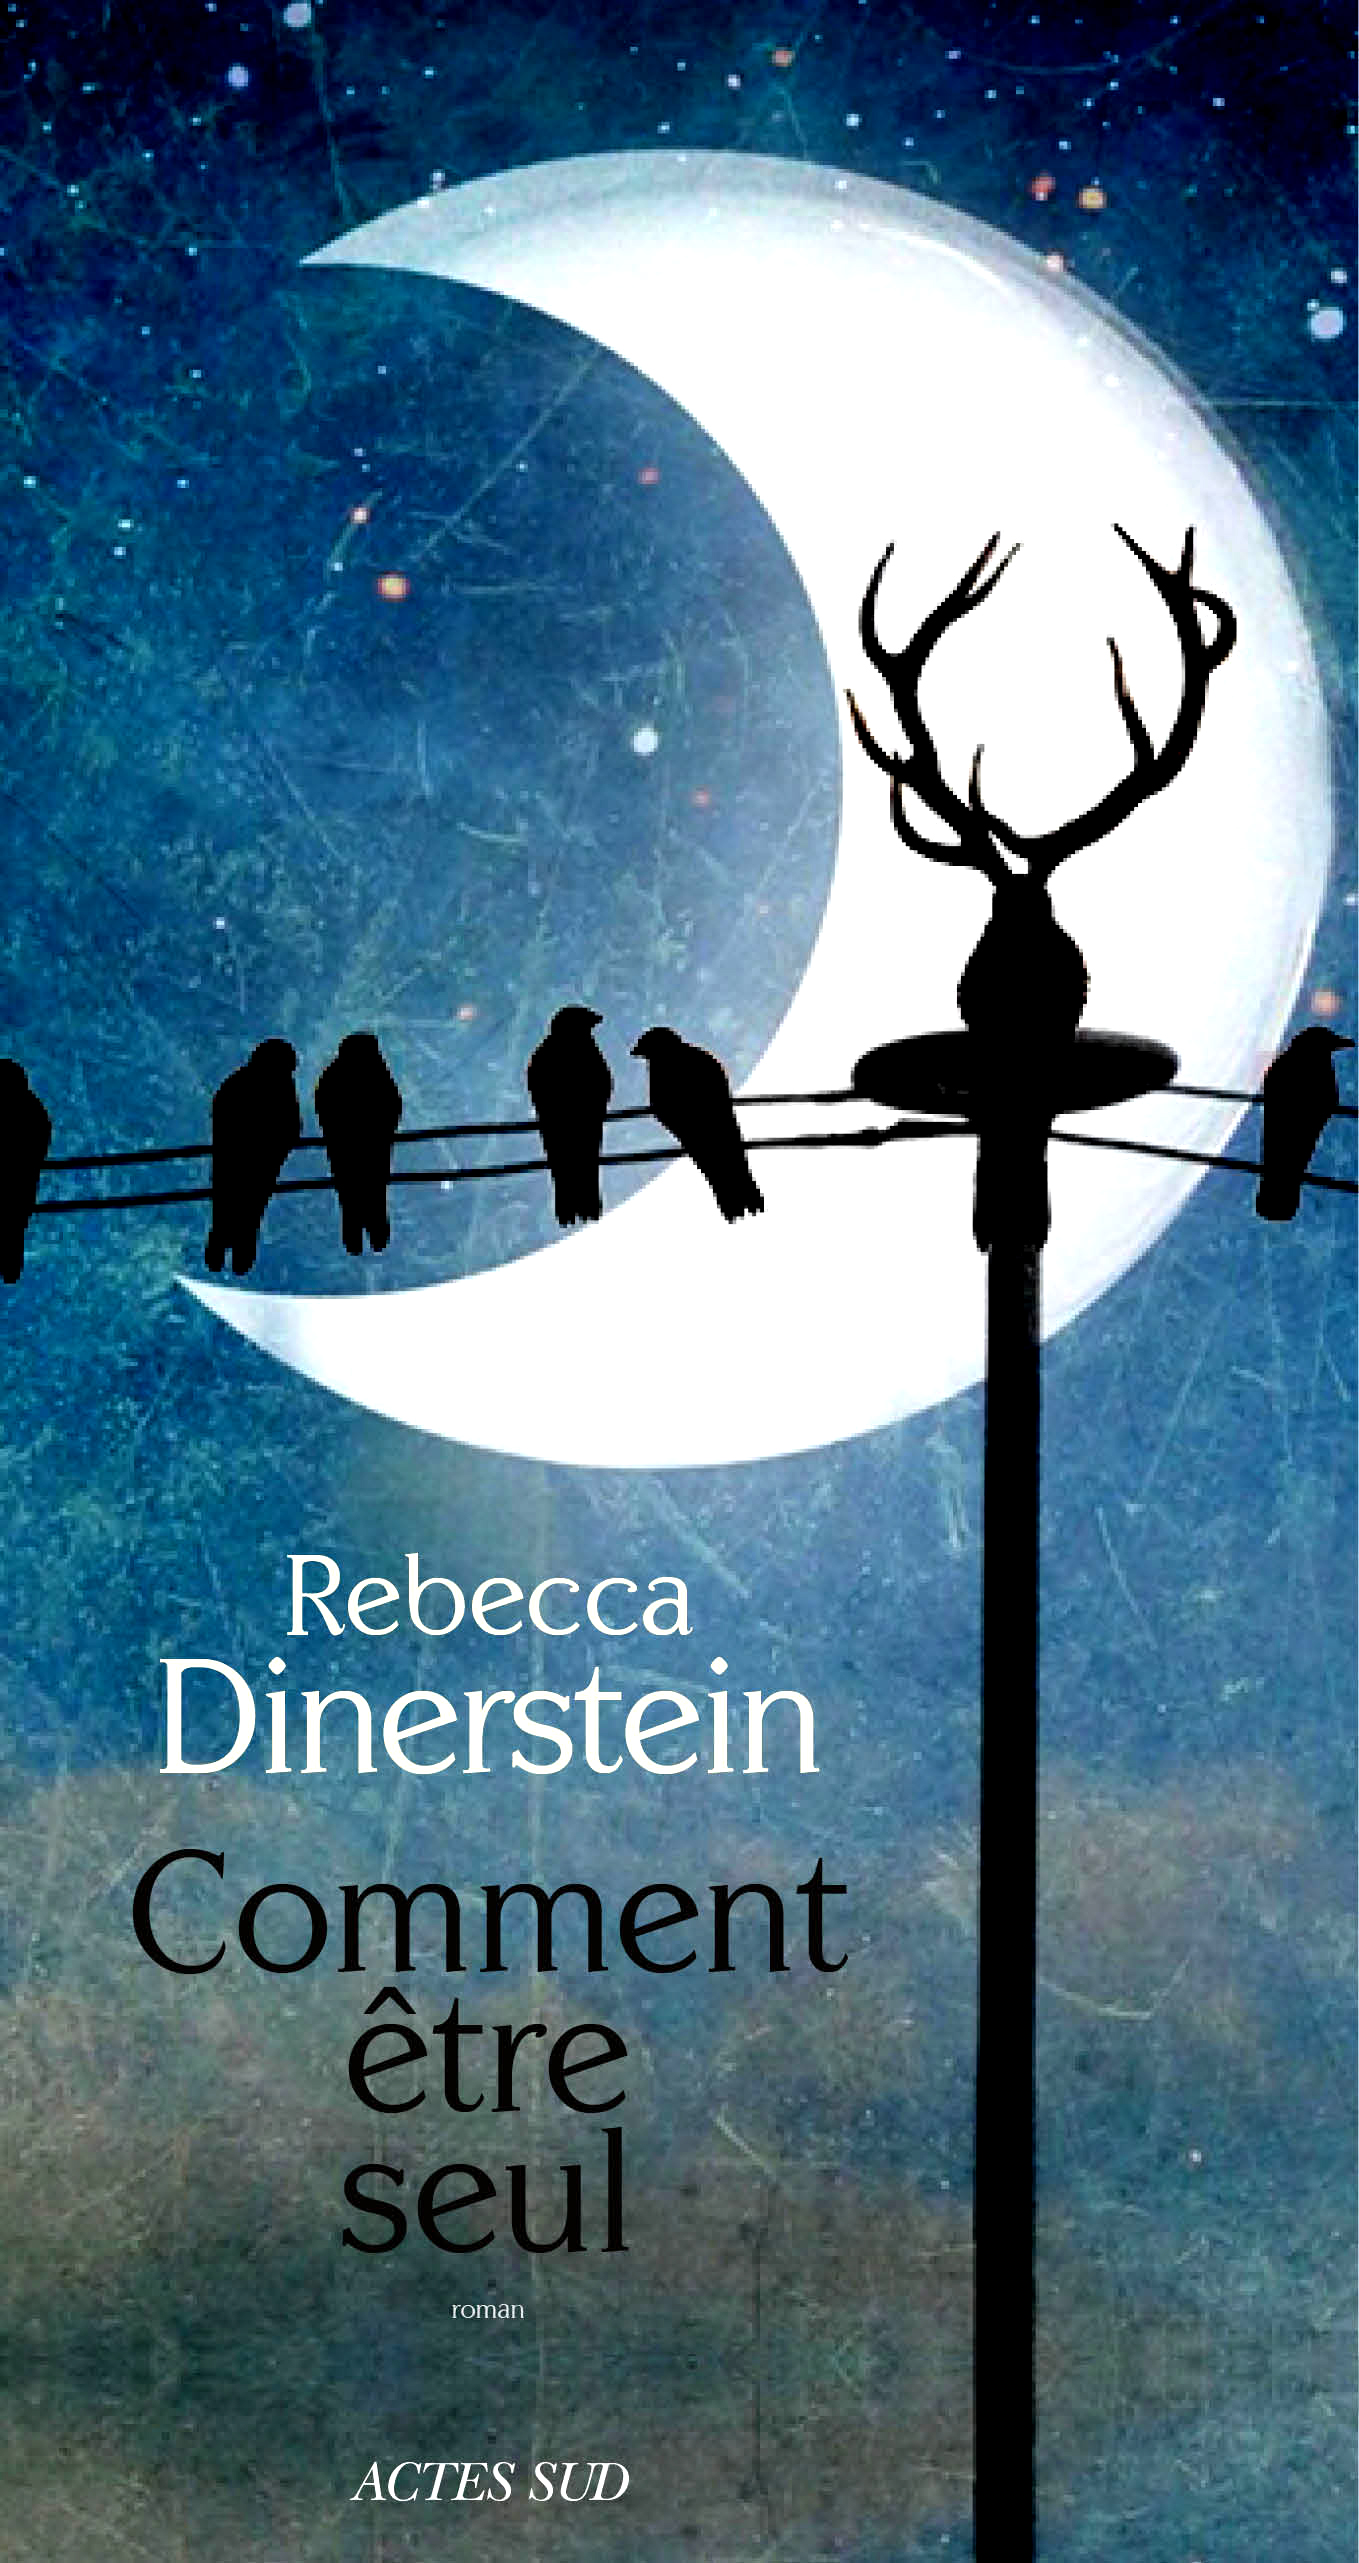 Dinerstein Rebecca - THE SUNLIT NIGHT (French cover).pdf.jpg